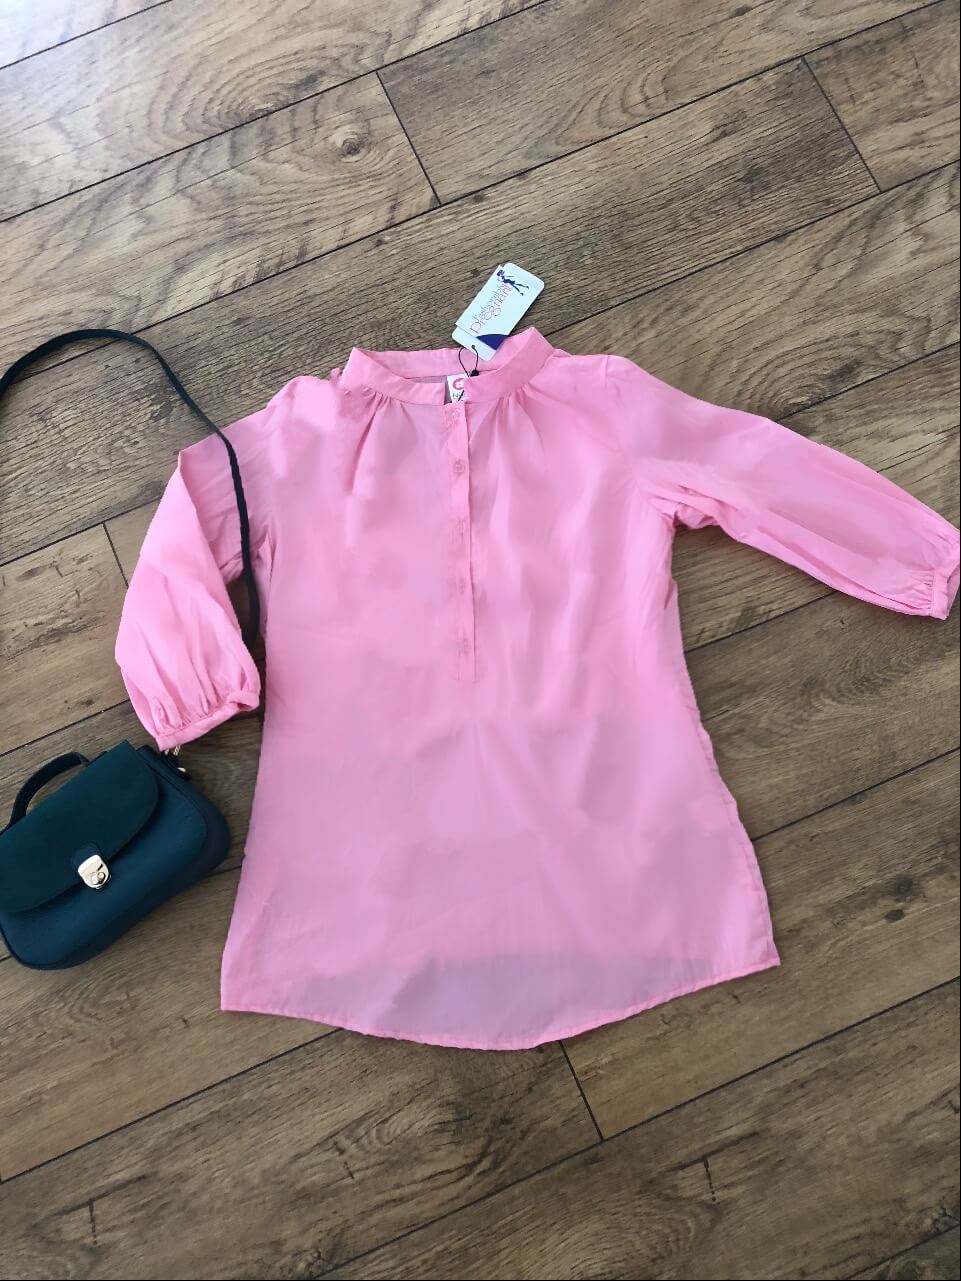 Pink cotton work smart casual pregnancy fashionably pregnant top blouse shirt